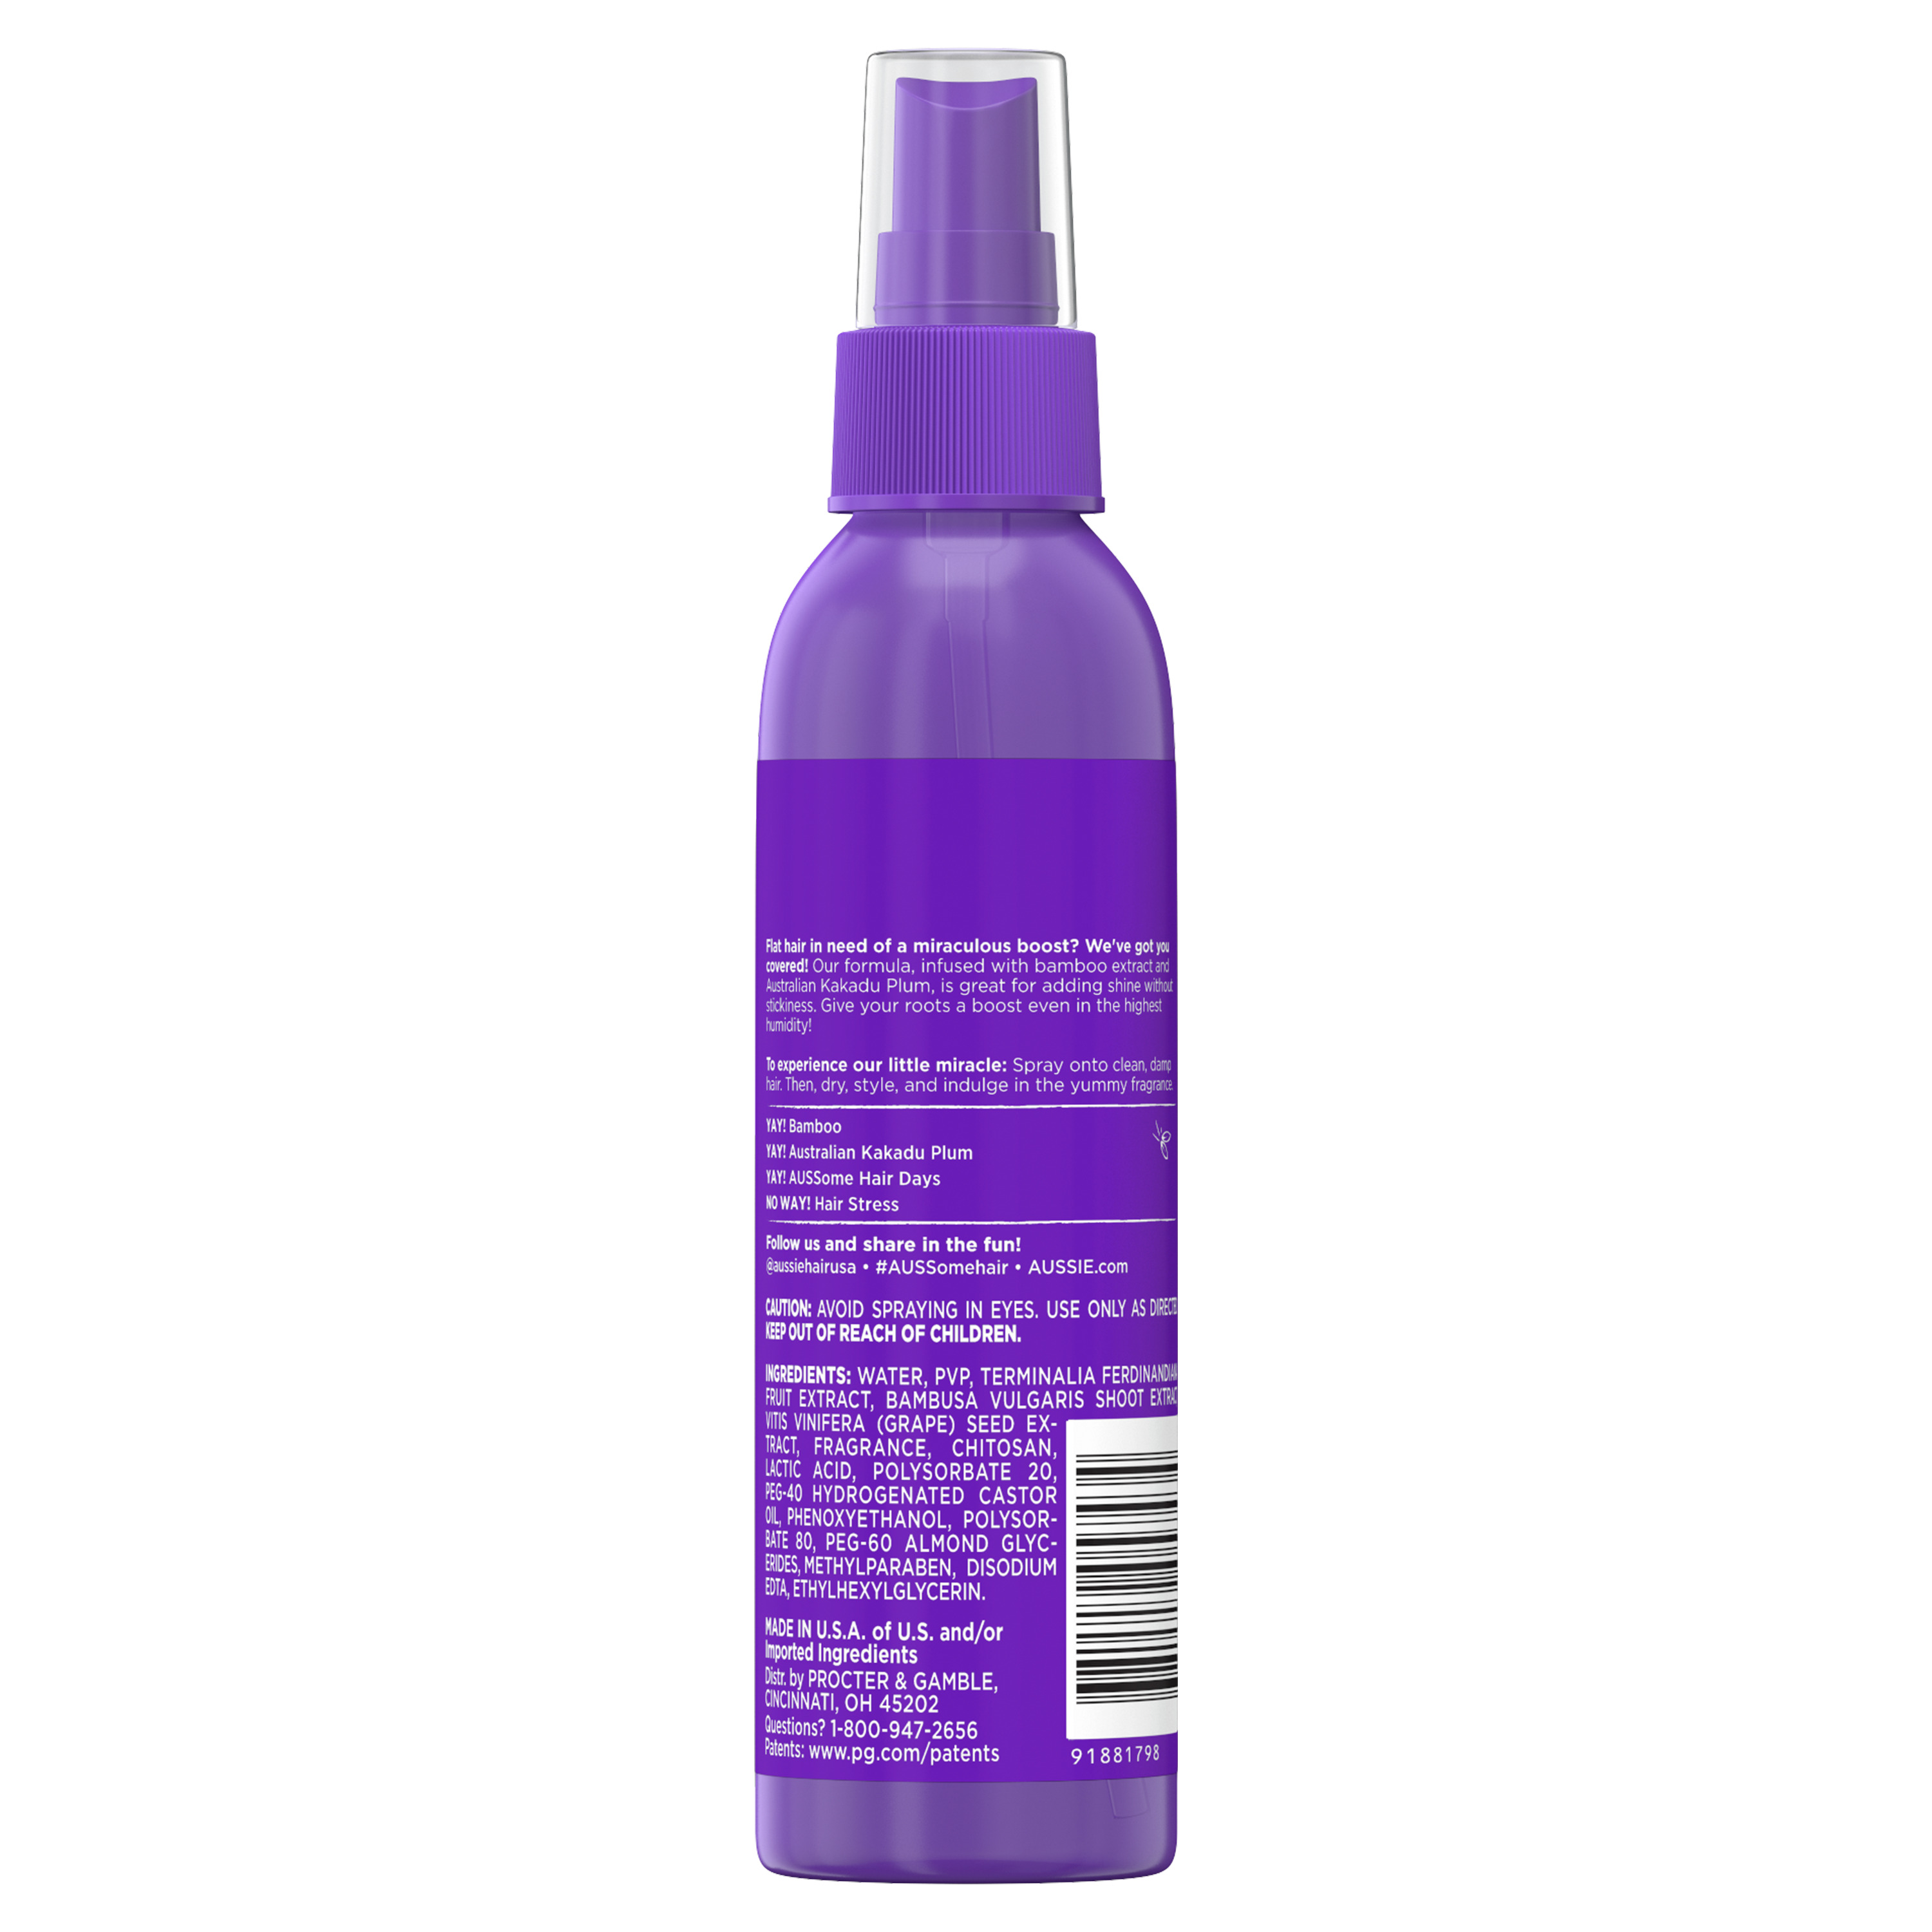 Aussie Headstrong Volume Volumizing Maximum Hold Squeeze Hair Styling Gel, 5.7 fl oz - image 3 of 7